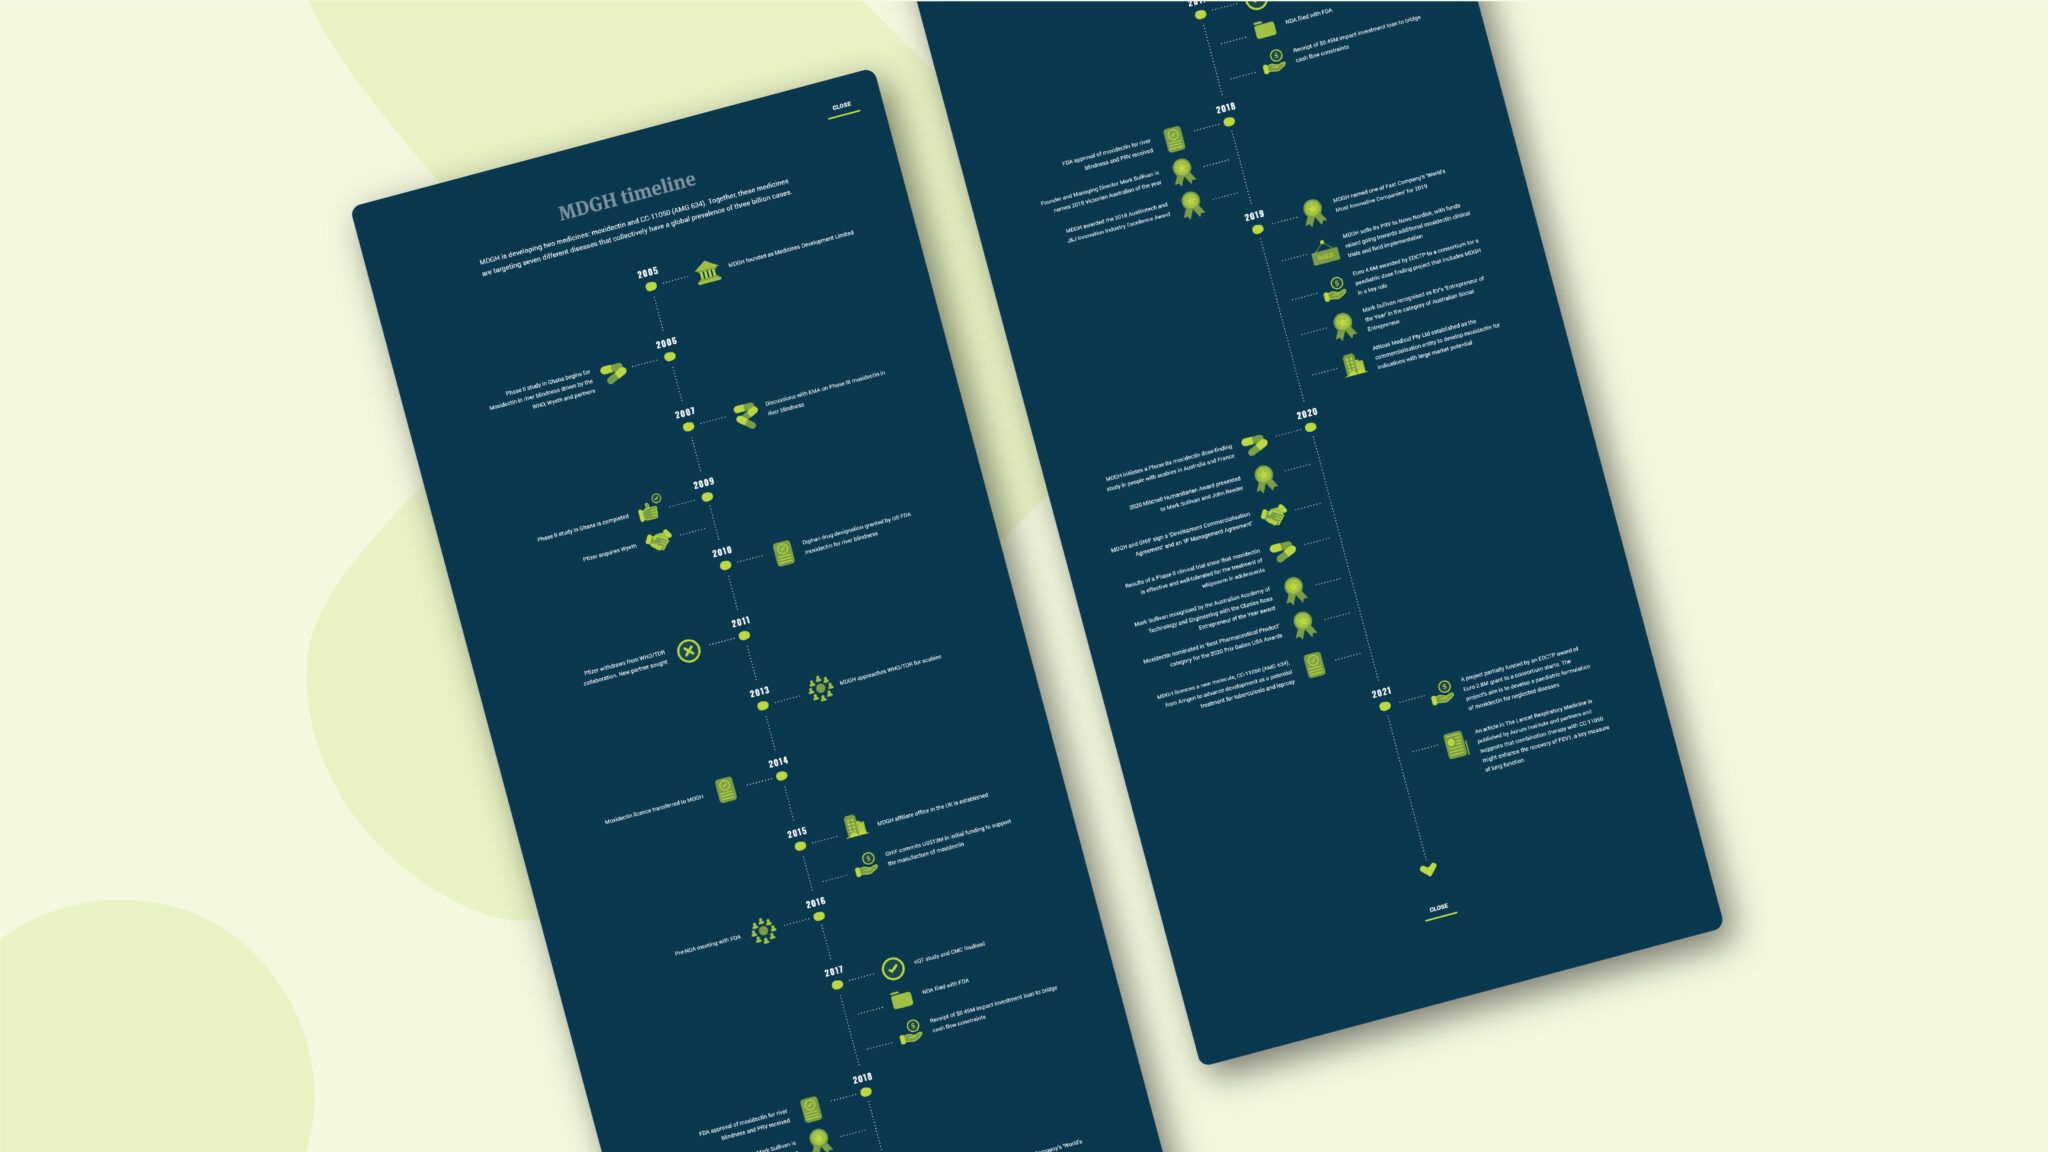 Navy blue MDGH timeline infographic on a light green background